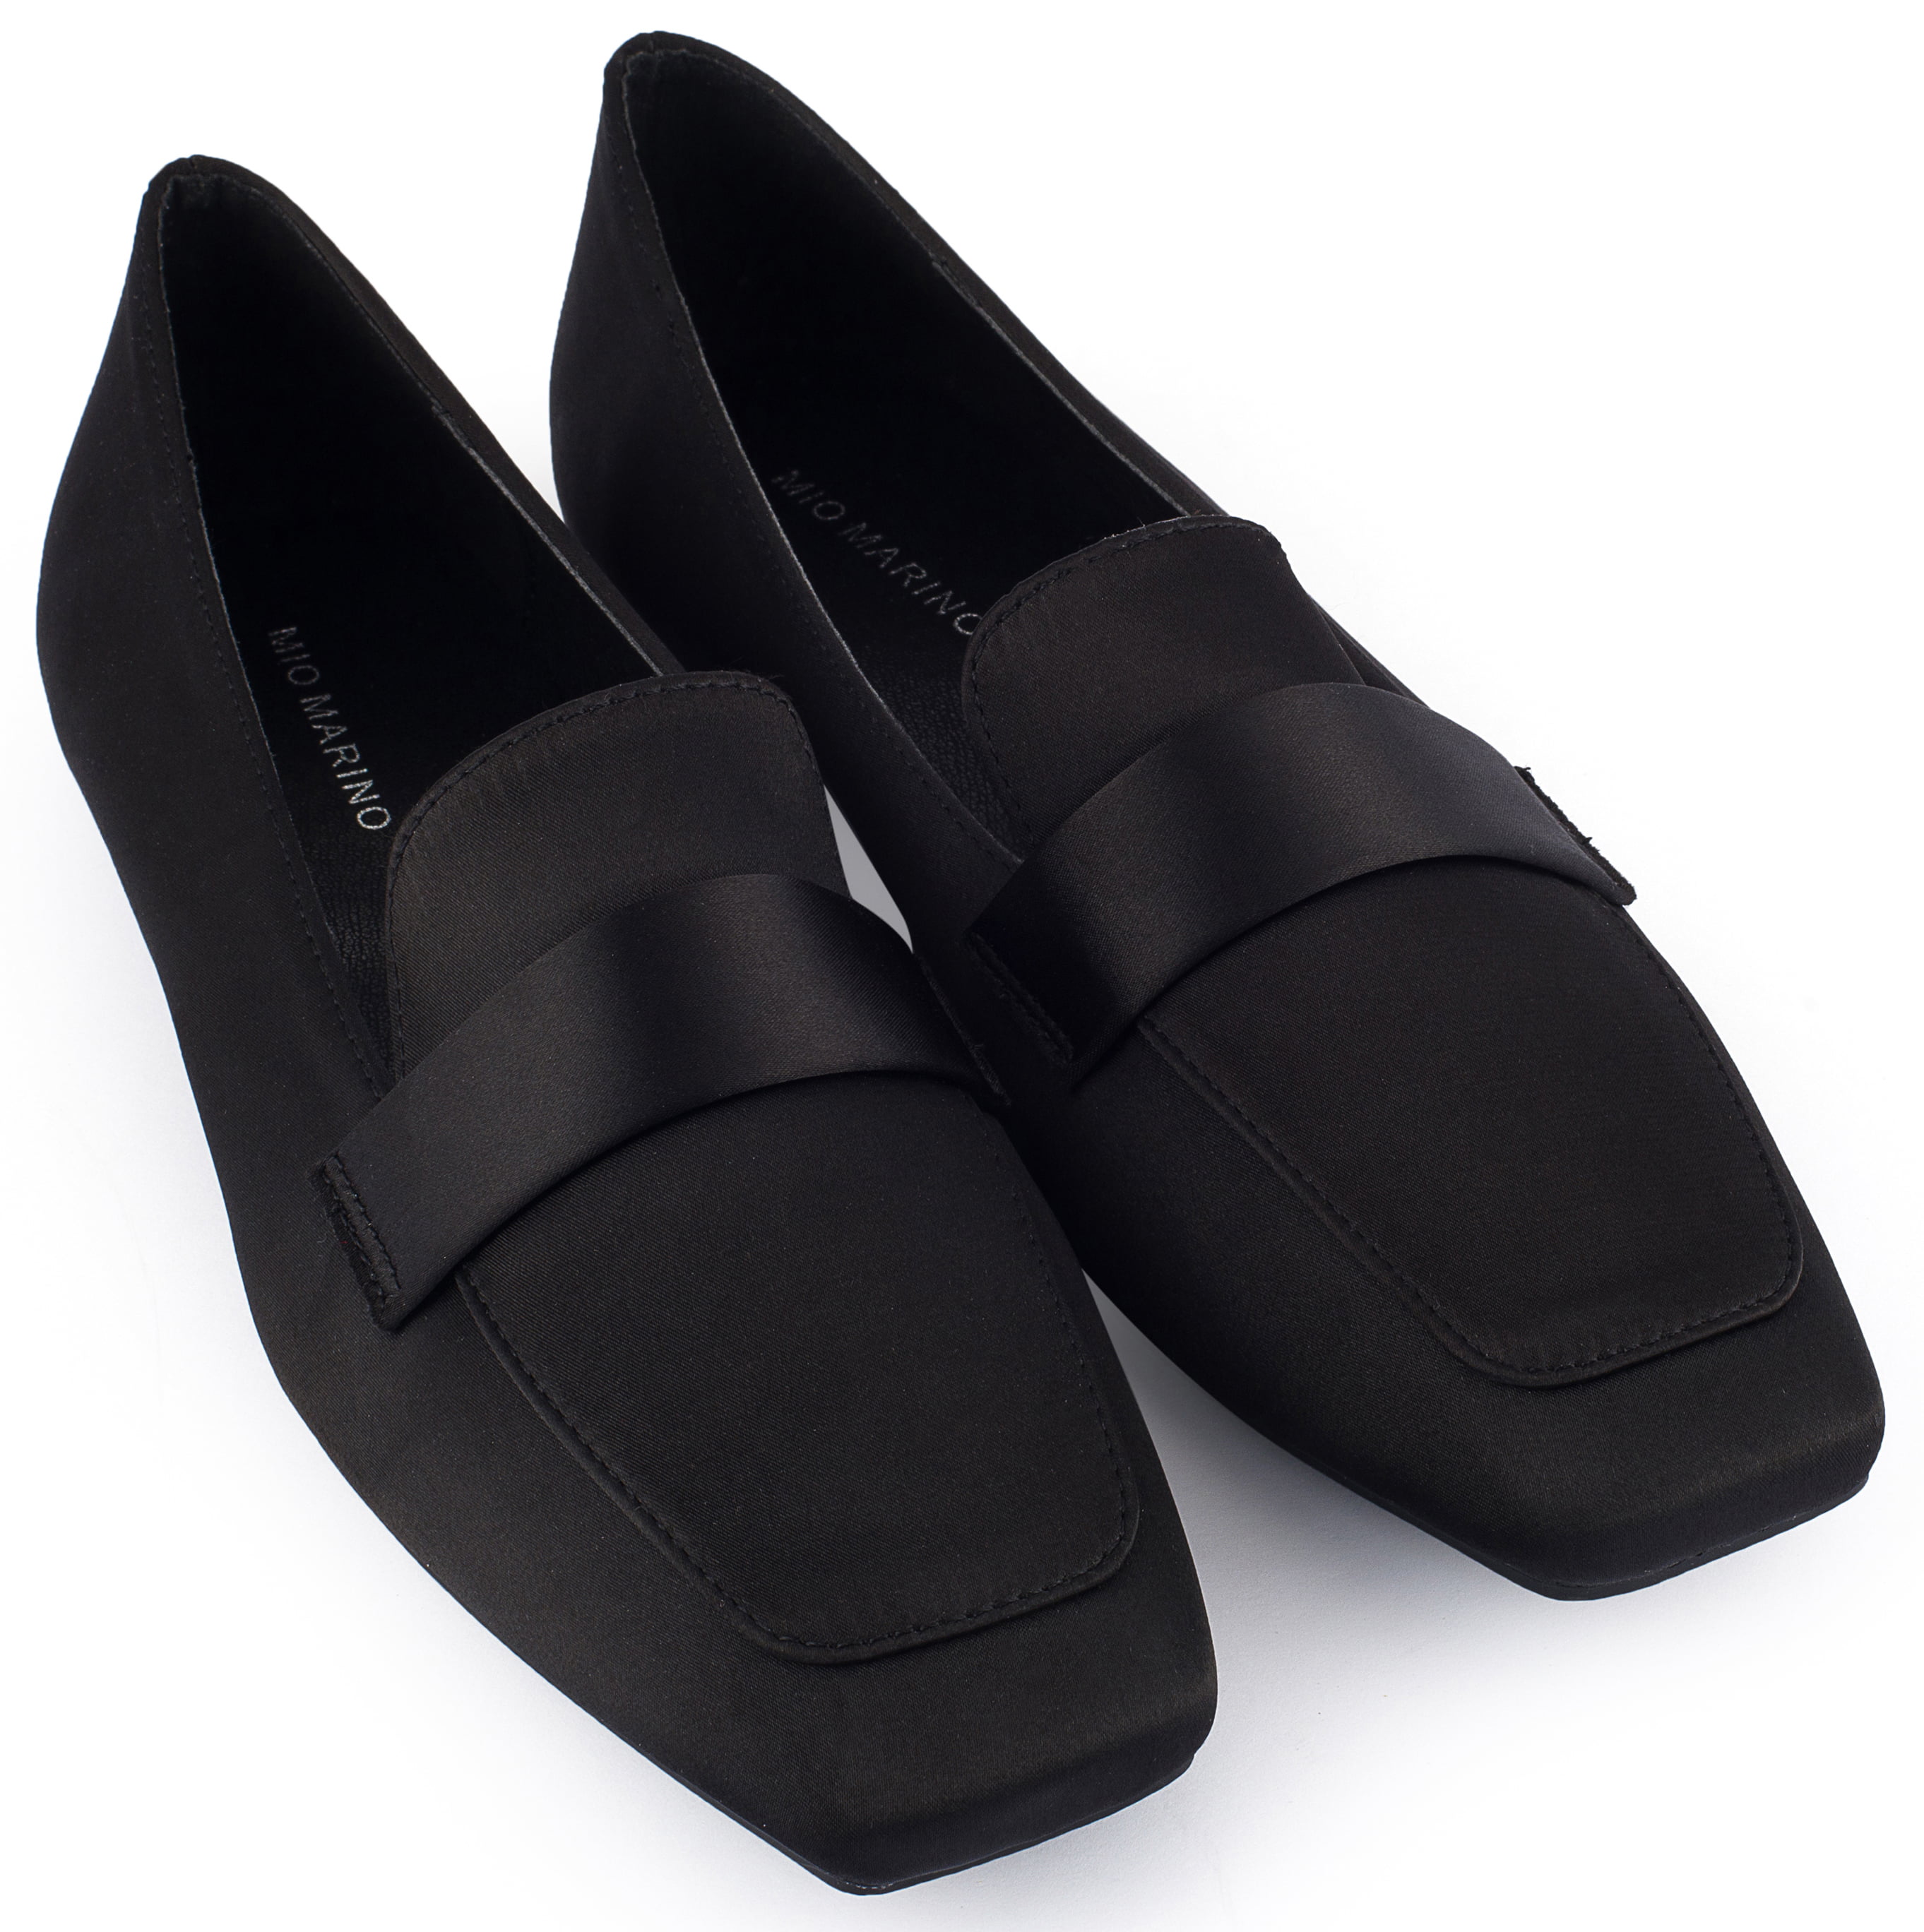 Flats Shoes Women Slip-on Loafers PU Comfort Walking Classic Square Toe Shoes